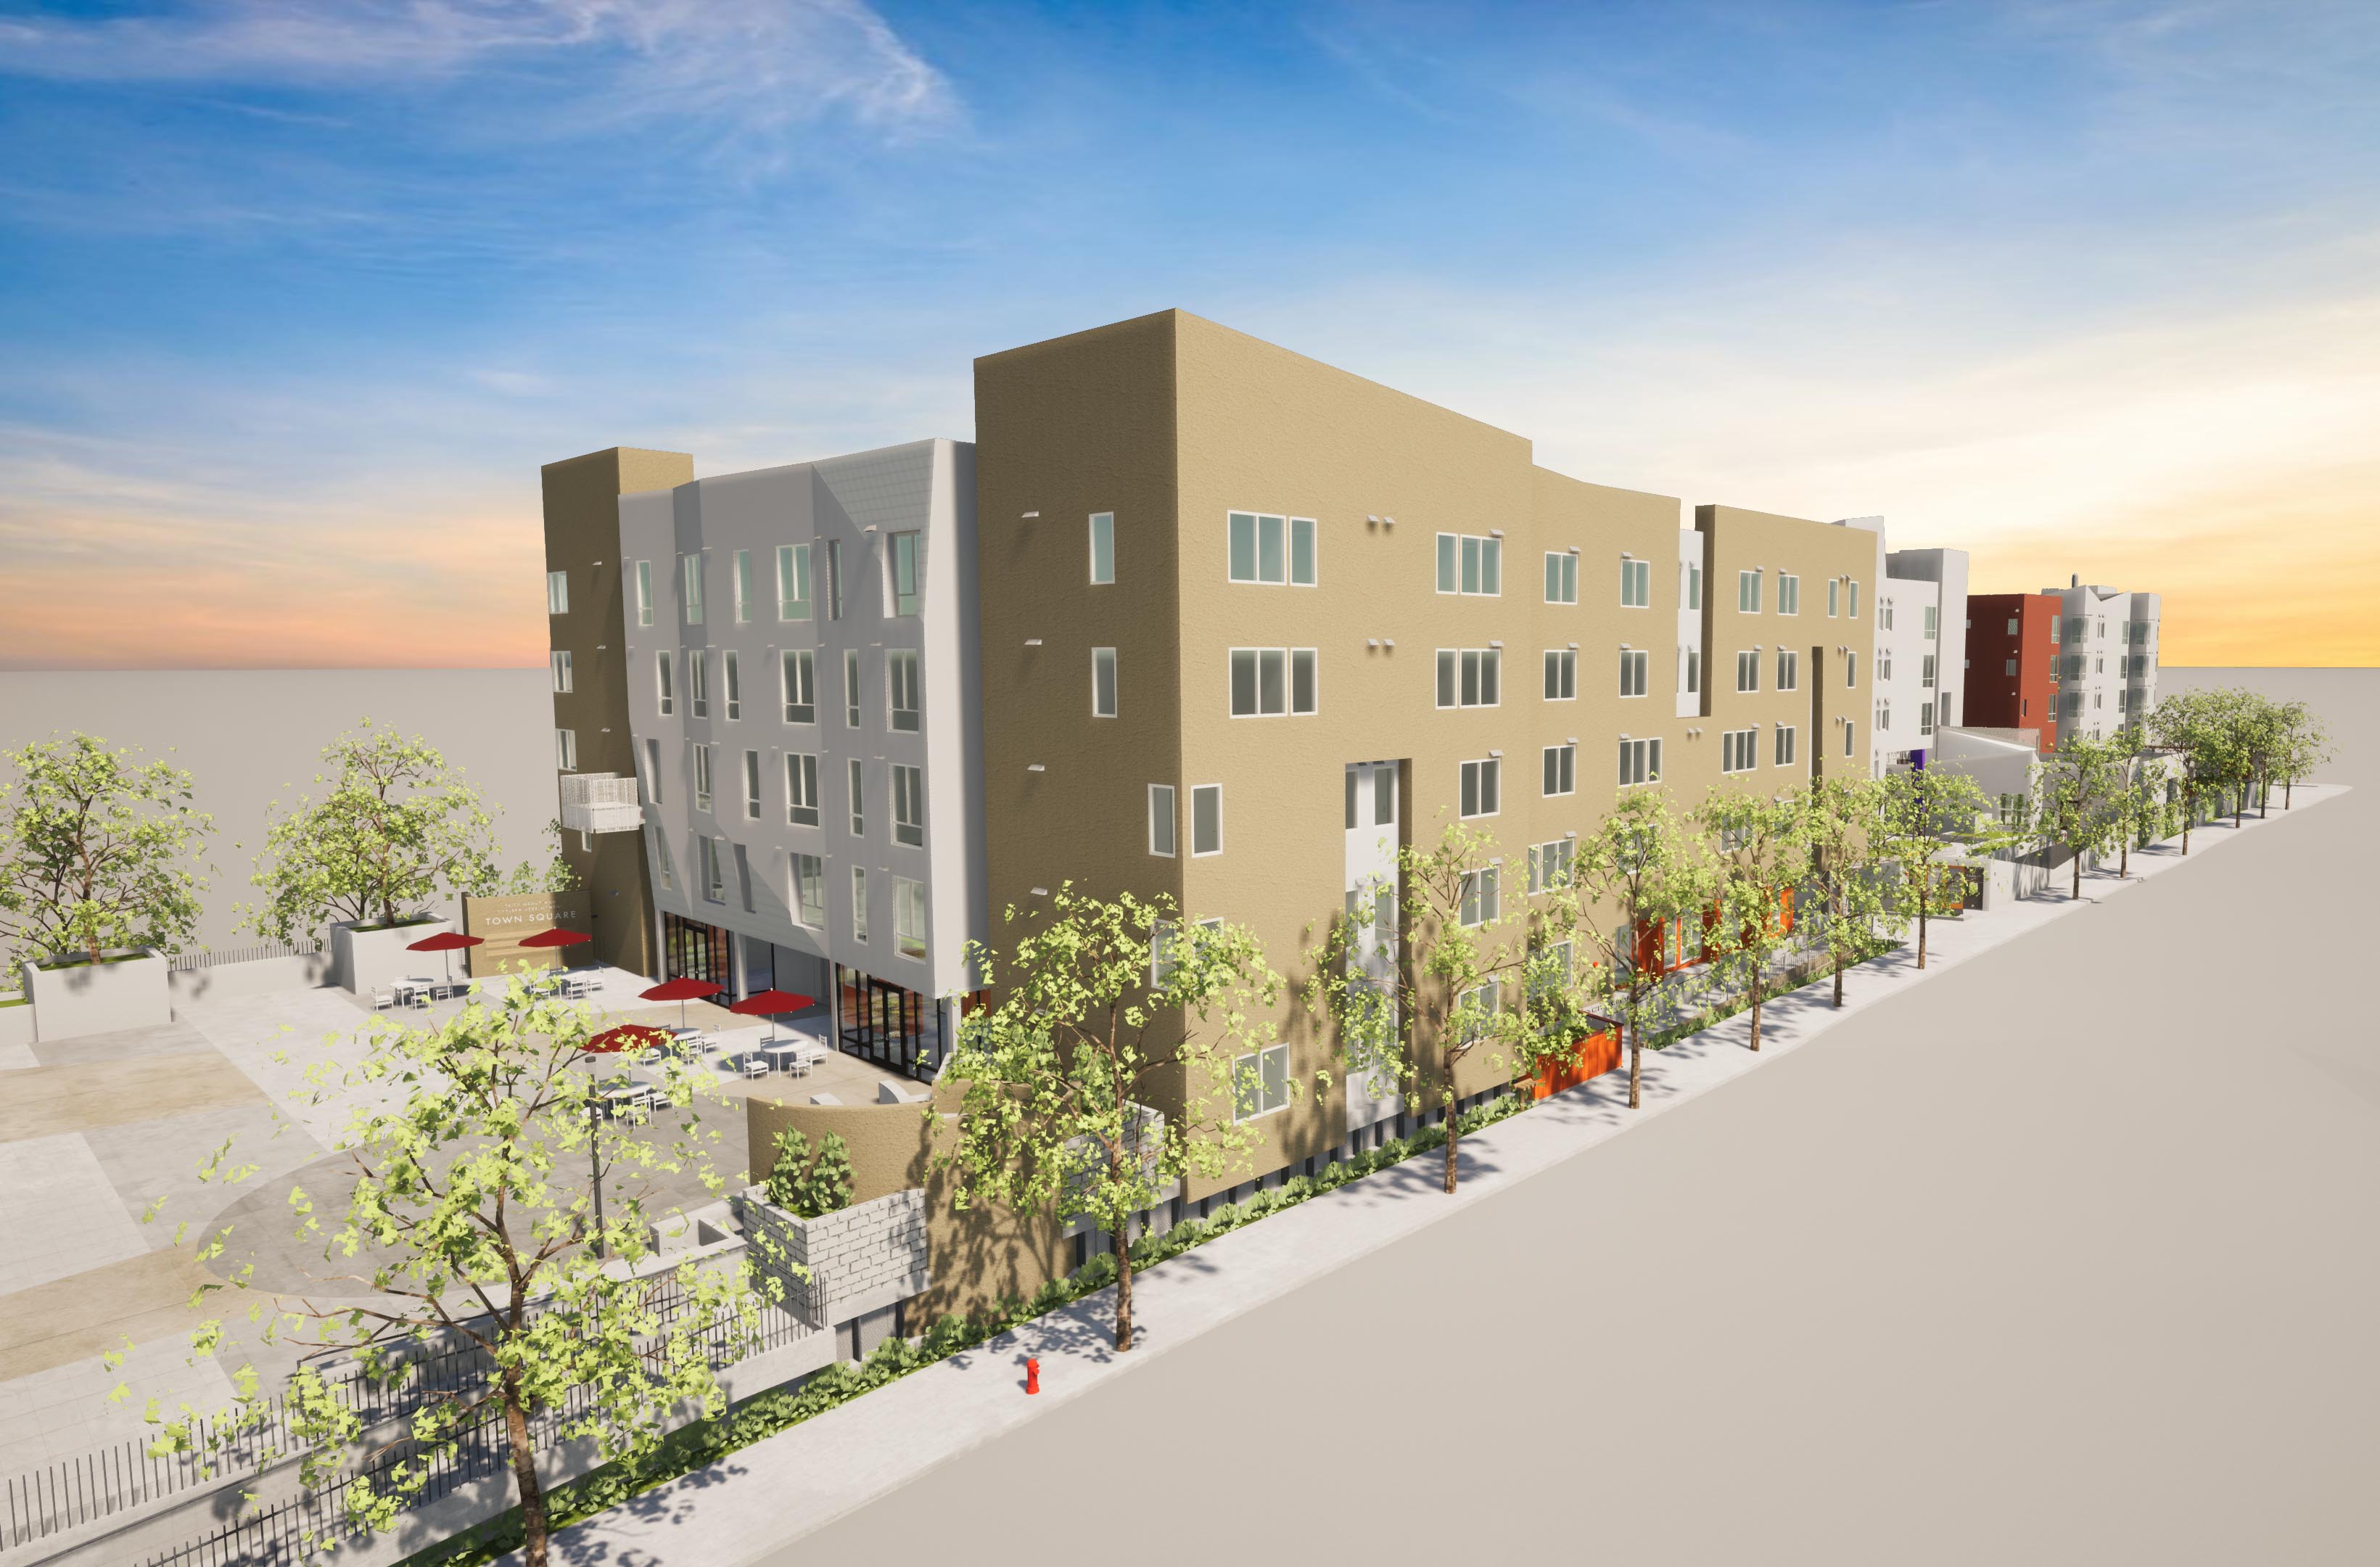 Rendering of the Mid-City senior apartments